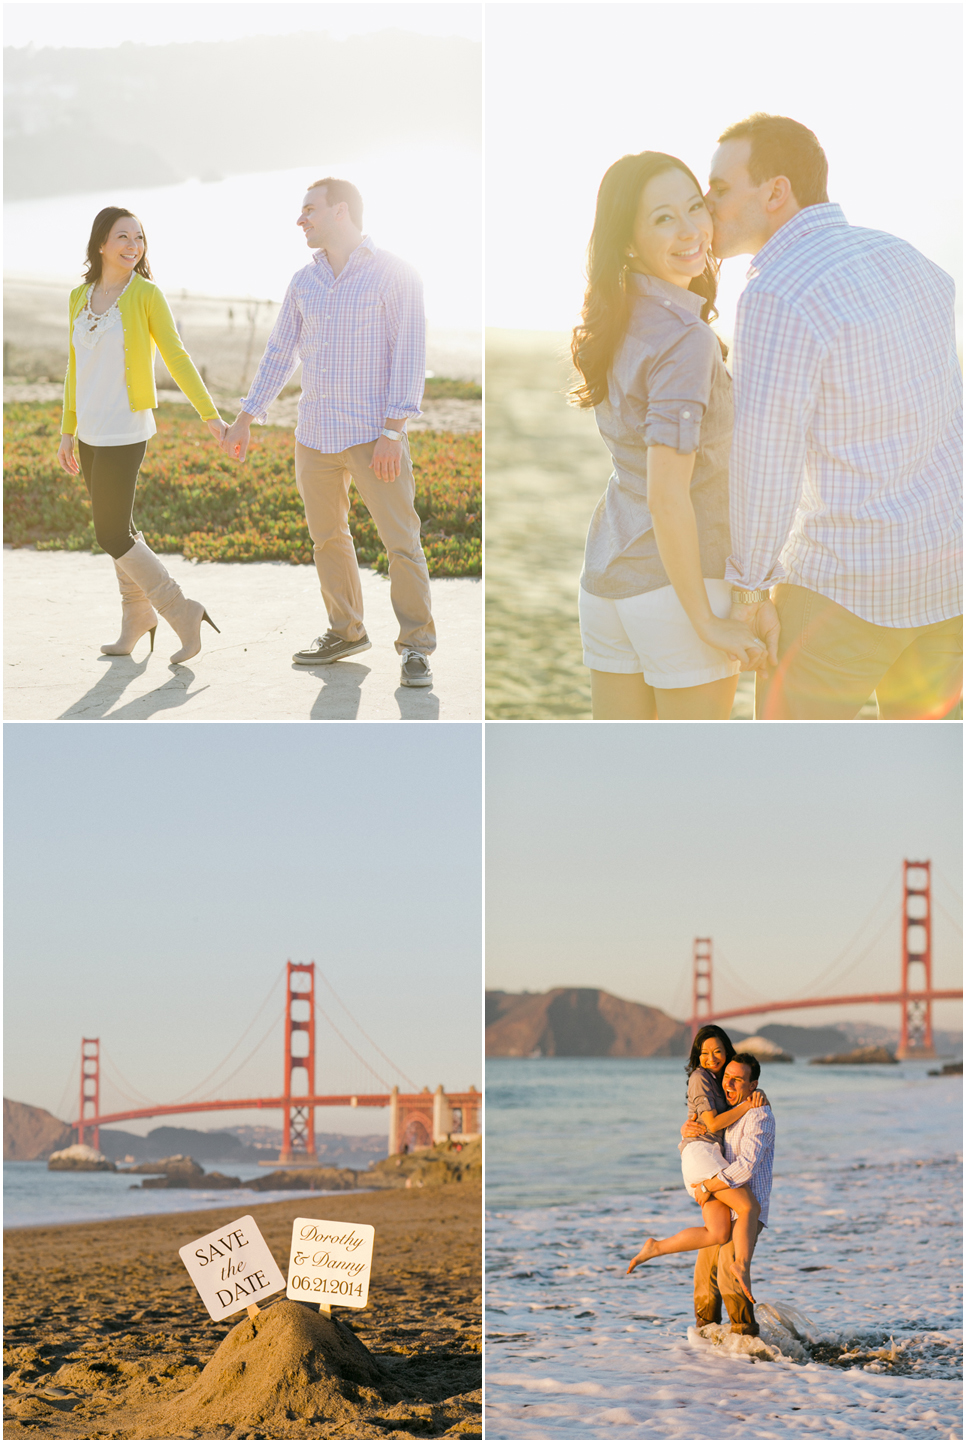 San francisco engagement photographer, beach engagement, baker beach, golden light, couple playing in water, save the dates